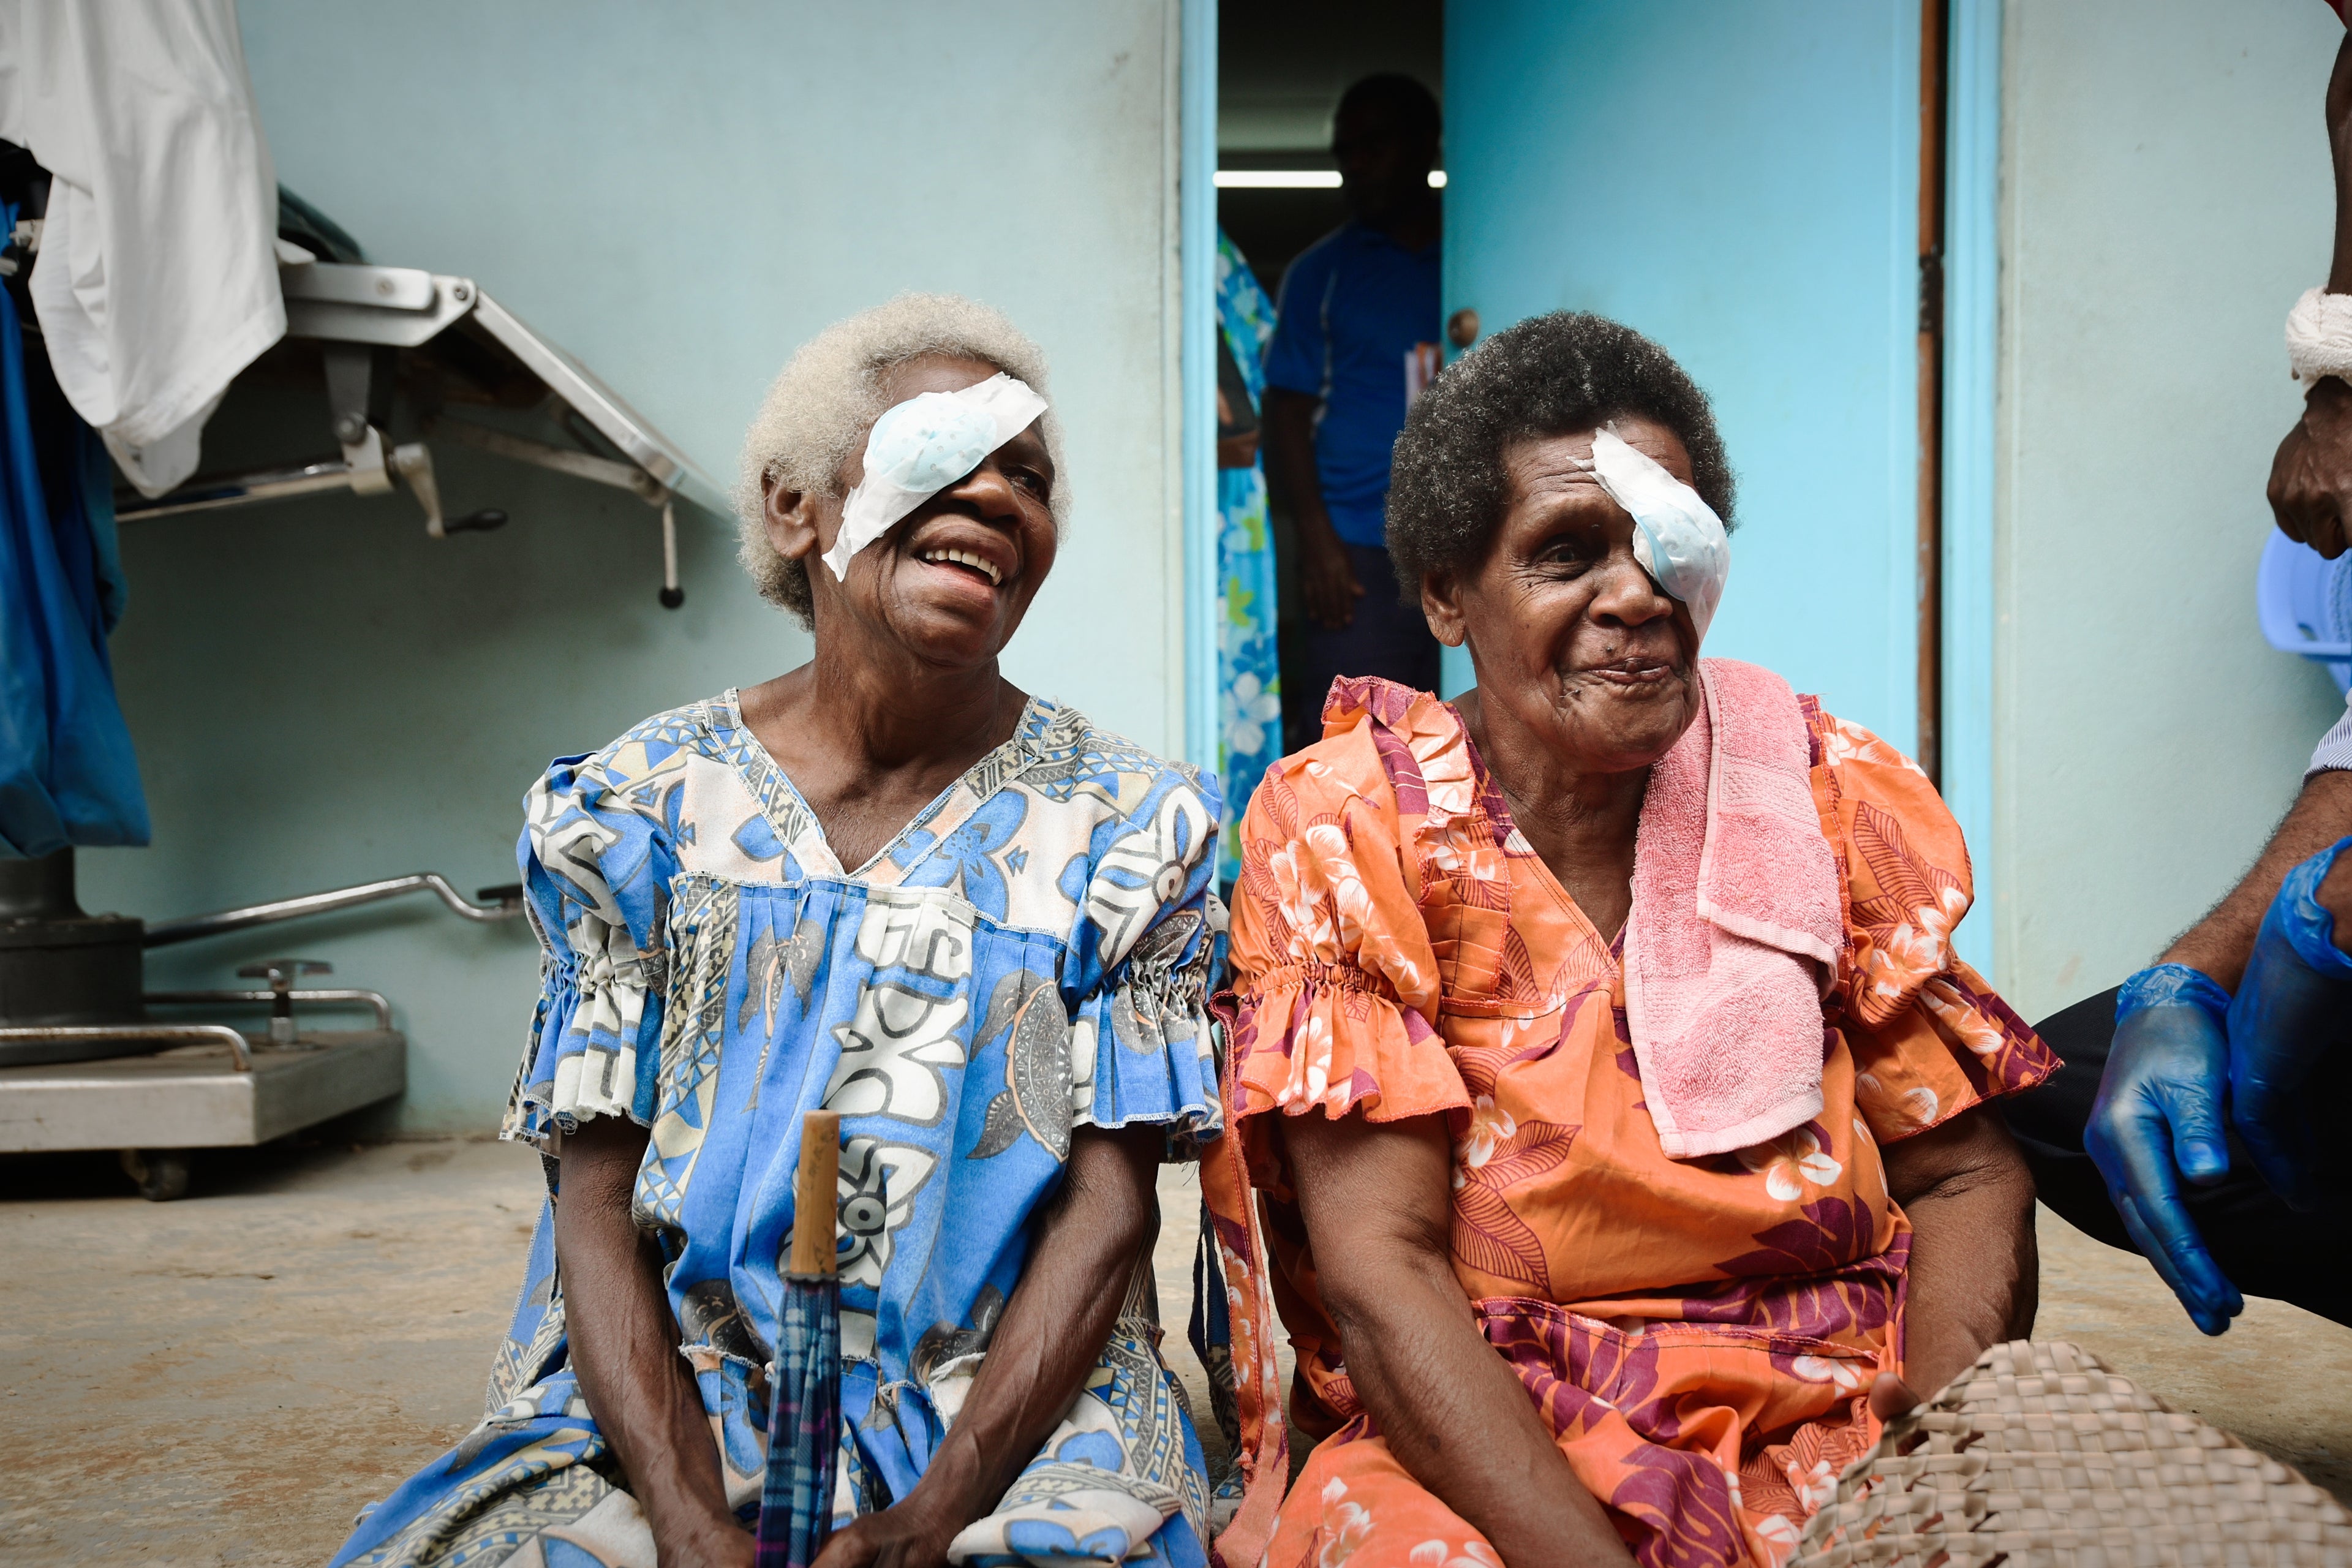 Two Pacific Island women with eye patch, smiling after restoring eyesight.